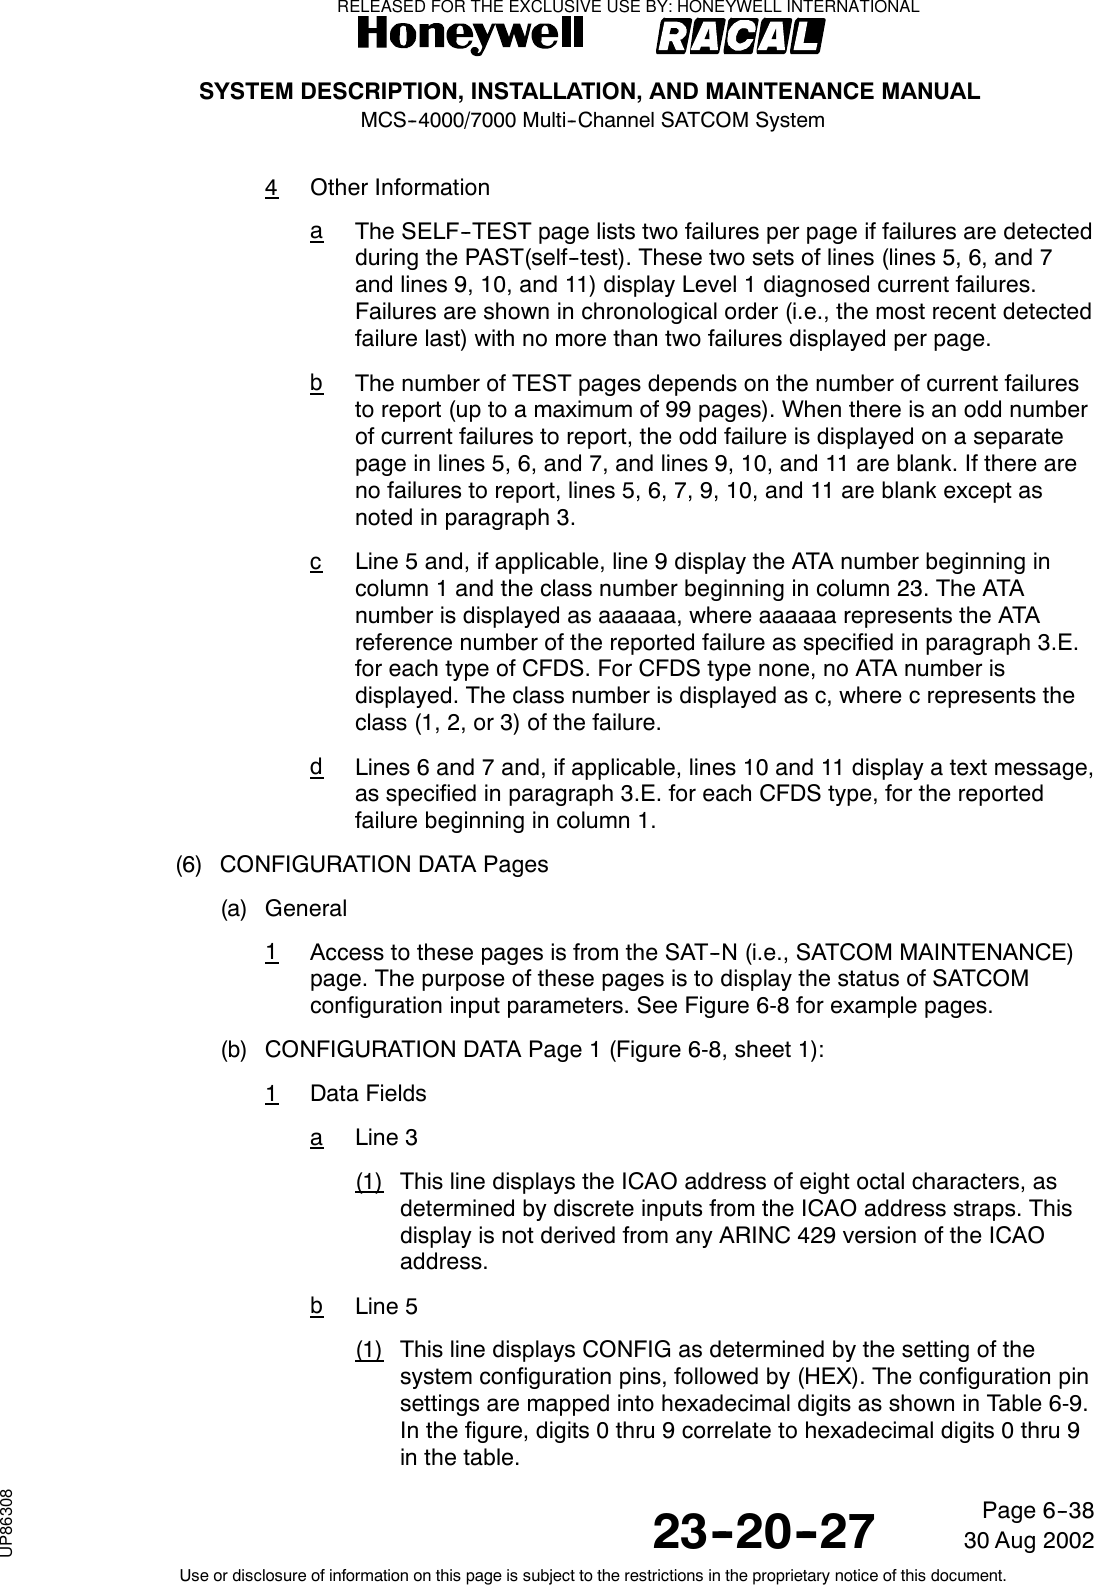 SYSTEM DESCRIPTION, INSTALLATION, AND MAINTENANCE MANUALMCS--4000/7000 Multi--Channel SATCOM System23--20--2730 Aug 2002Use or disclosure of information on this page is subject to the restrictions in the proprietary notice of this document.Page 6--384Other InformationaThe SELF--TEST page lists two failures per page if failures are detectedduring the PAST(self--test). These two sets of lines (lines 5, 6, and 7and lines 9, 10, and 11) display Level 1 diagnosed current failures.Failures are shown in chronological order (i.e., the most recent detectedfailure last) with no more than two failures displayed per page.bThe number of TEST pages depends on the number of current failuresto report (up to a maximum of 99 pages). When there is an odd numberof current failures to report, the odd failure is displayed on a separatepage in lines 5, 6, and 7, and lines 9, 10, and 11 are blank. If there areno failures to report, lines 5, 6, 7, 9, 10, and 11 are blank except asnoted in paragraph 3.cLine 5 and, if applicable, line 9 display the ATA number beginning incolumn 1 and the class number beginning in column 23. The ATAnumber is displayed as aaaaaa, where aaaaaa represents the ATAreference number of the reported failure as specified in paragraph 3.E.for each type of CFDS. For CFDS type none, no ATA number isdisplayed. The class number is displayed as c, where c represents theclass (1, 2, or 3) of the failure.dLines 6 and 7 and, if applicable, lines 10 and 11 display a text message,as specified in paragraph 3.E. for each CFDS type, for the reportedfailure beginning in column 1.(6) CONFIGURATION DATA Pages(a) General1Access to these pages is from the SAT--N (i.e., SATCOM MAINTENANCE)page. The purpose of these pages is to display the status of SATCOMconfiguration input parameters. See Figure 6-8 for example pages.(b) CONFIGURATION DATA Page 1 (Figure 6-8, sheet 1):1Data FieldsaLine 3(1) This line displays the ICAO address of eight octal characters, asdetermined by discrete inputs from the ICAO address straps. Thisdisplay is not derived from any ARINC 429 version of the ICAOaddress.bLine 5(1) This line displays CONFIG as determined by the setting of thesystem configuration pins, followed by (HEX). The configuration pinsettings are mapped into hexadecimal digits as shown in Table 6-9.In the figure, digits 0 thru 9 correlate to hexadecimal digits 0 thru 9in the table.RELEASED FOR THE EXCLUSIVE USE BY: HONEYWELL INTERNATIONALUP86308